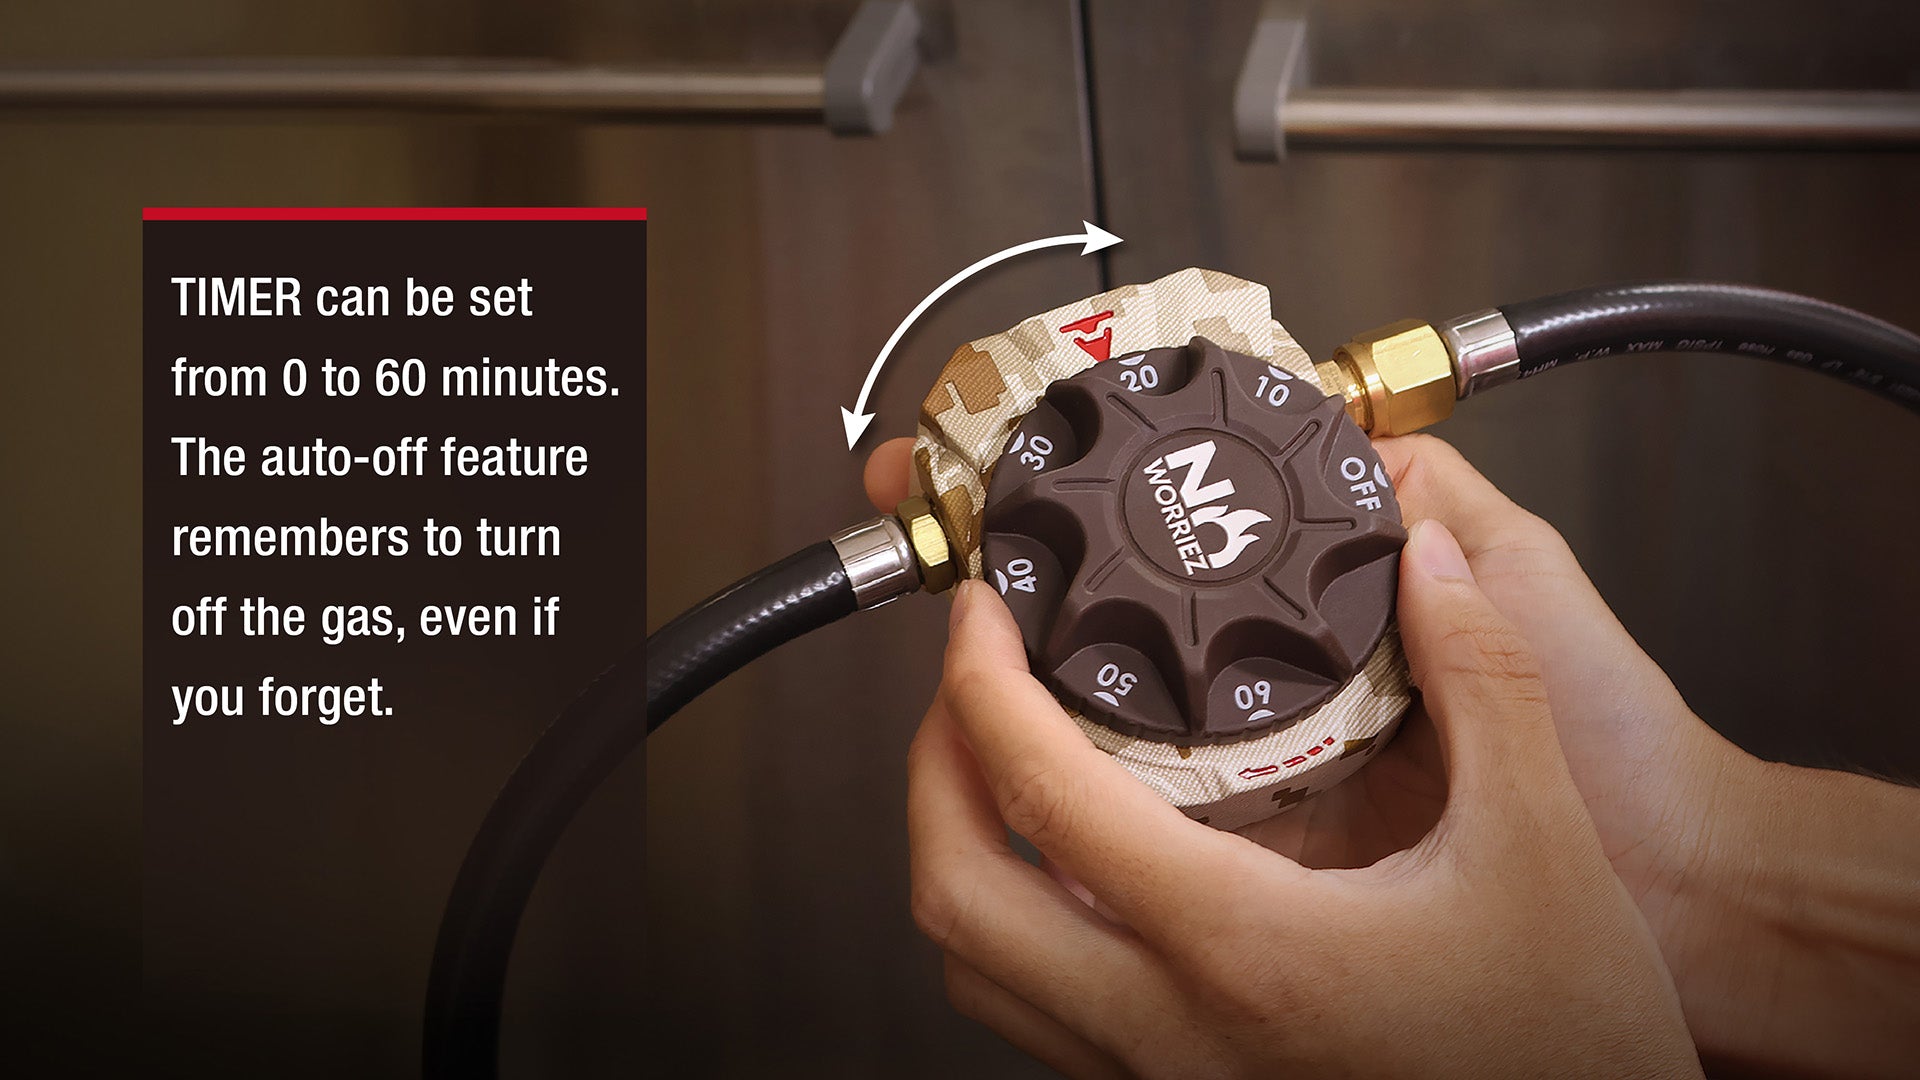 twist the knob to set the timer up to 60 minutes and automatically shut-off on time